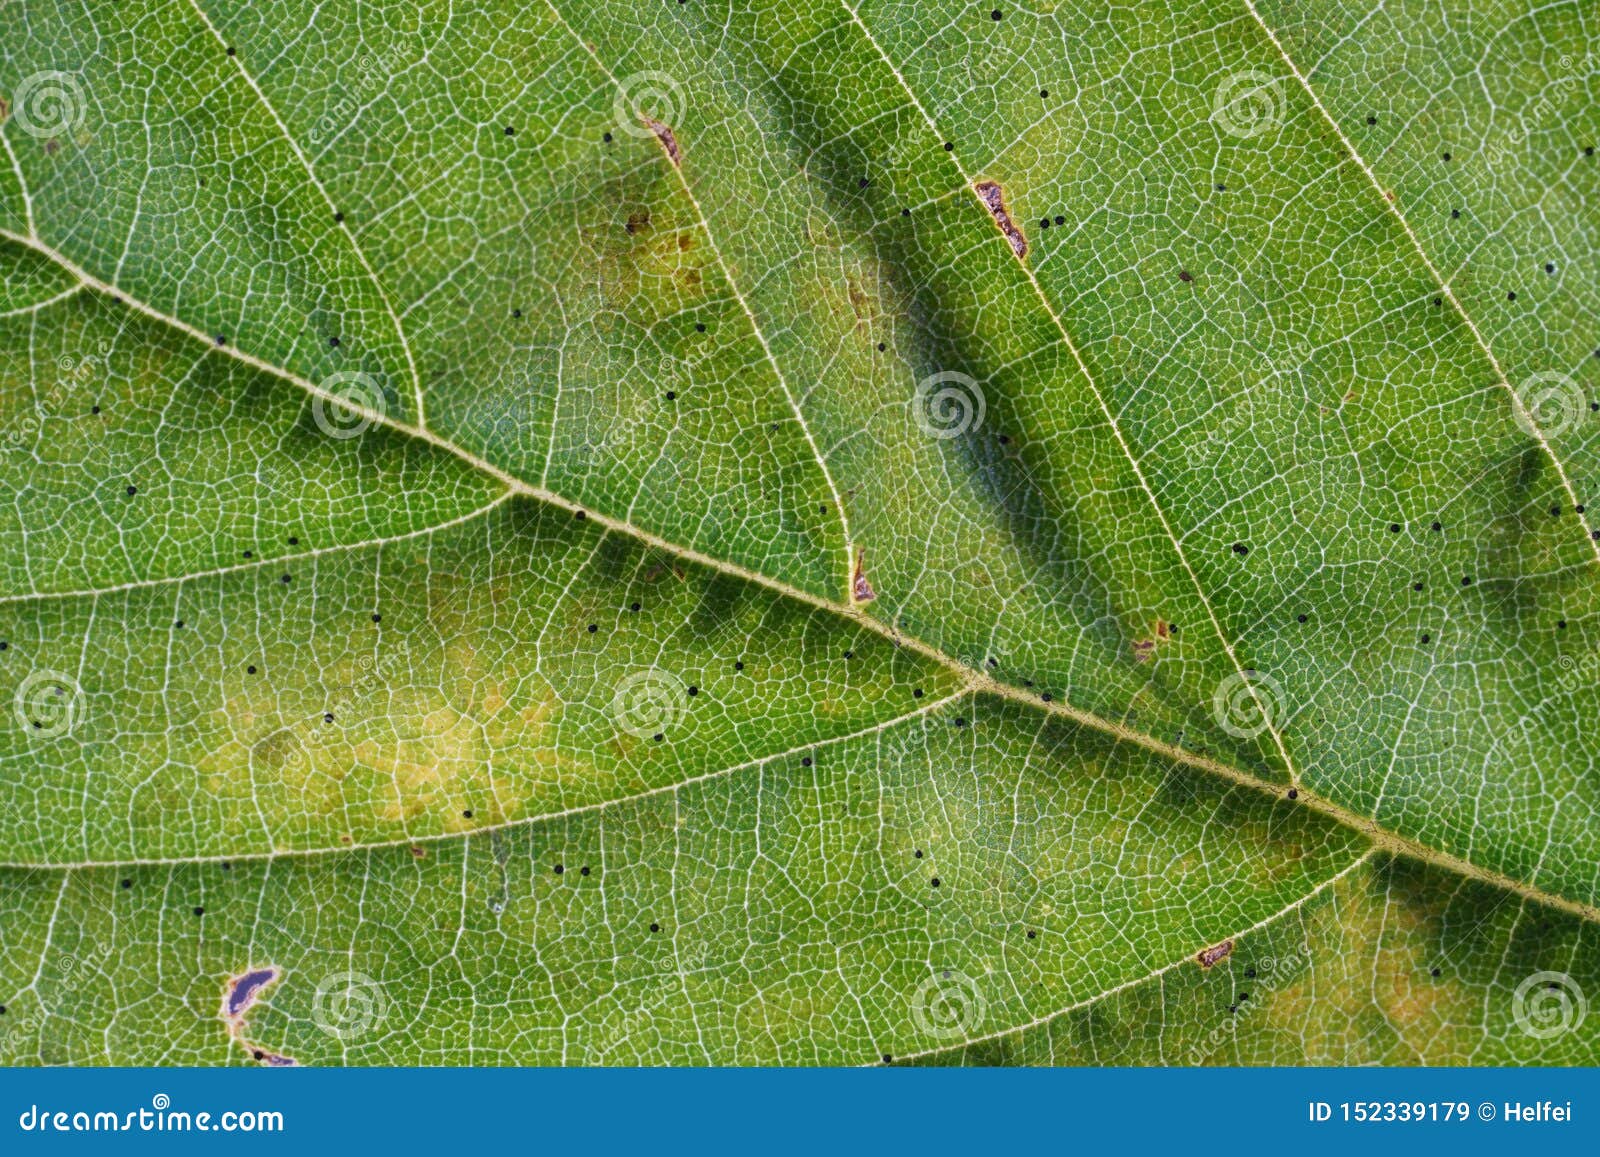 sheets-of-german-plants-photographed-in-macro-mode-in-best-quality-stock-image-image-of-branch